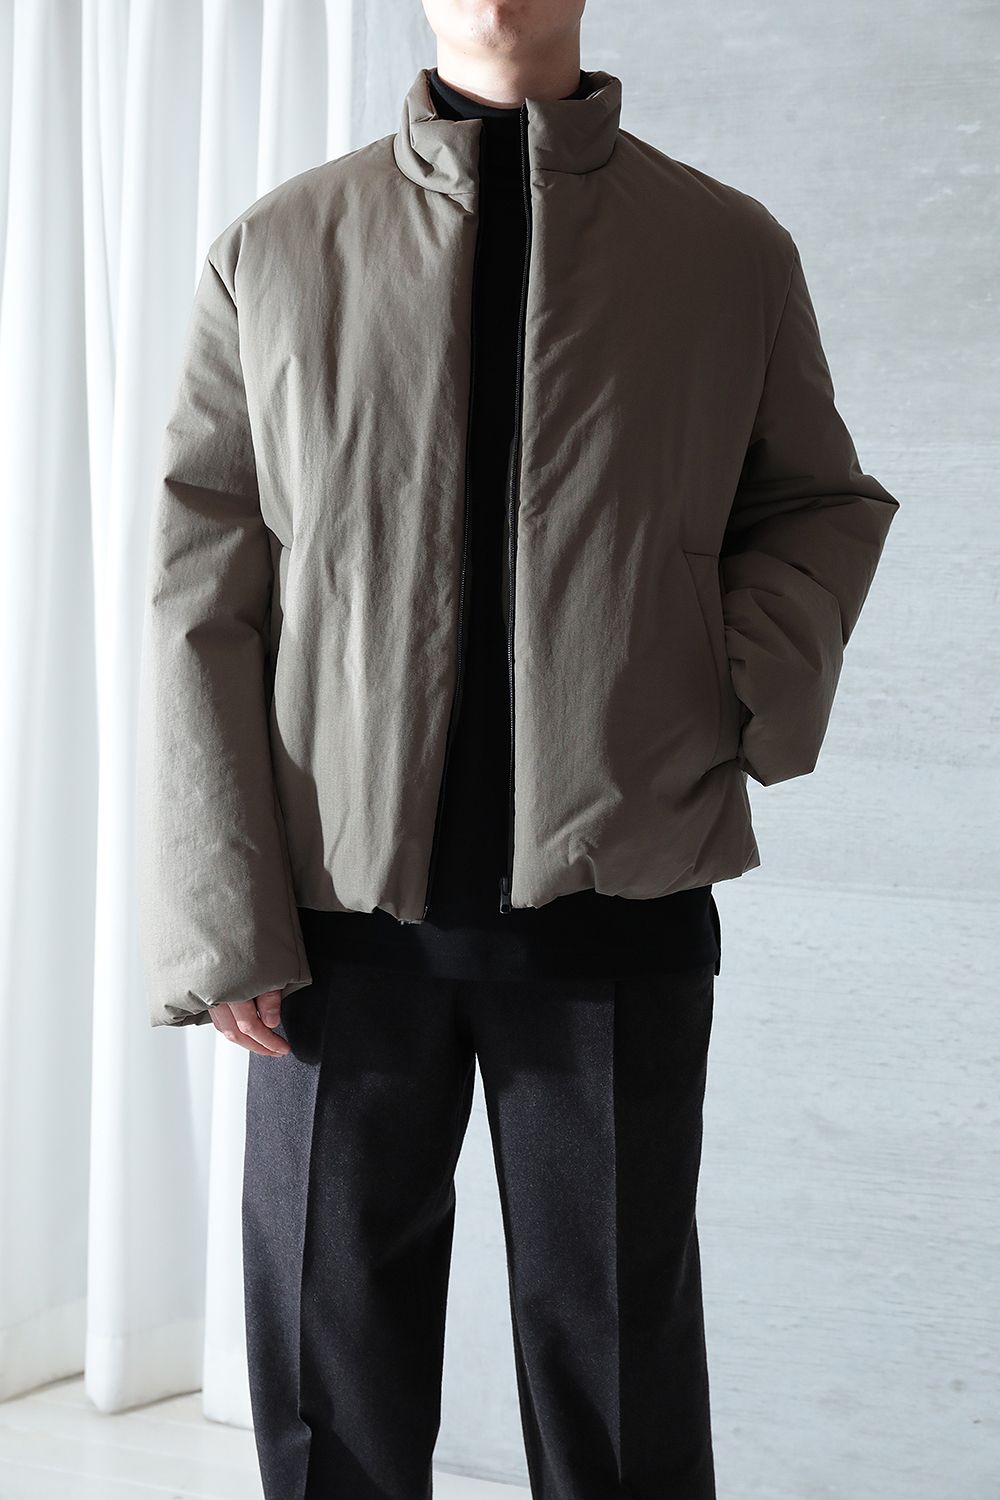 WEWILL SOLID PUFFER JACKET定価74800円 - ブルゾン